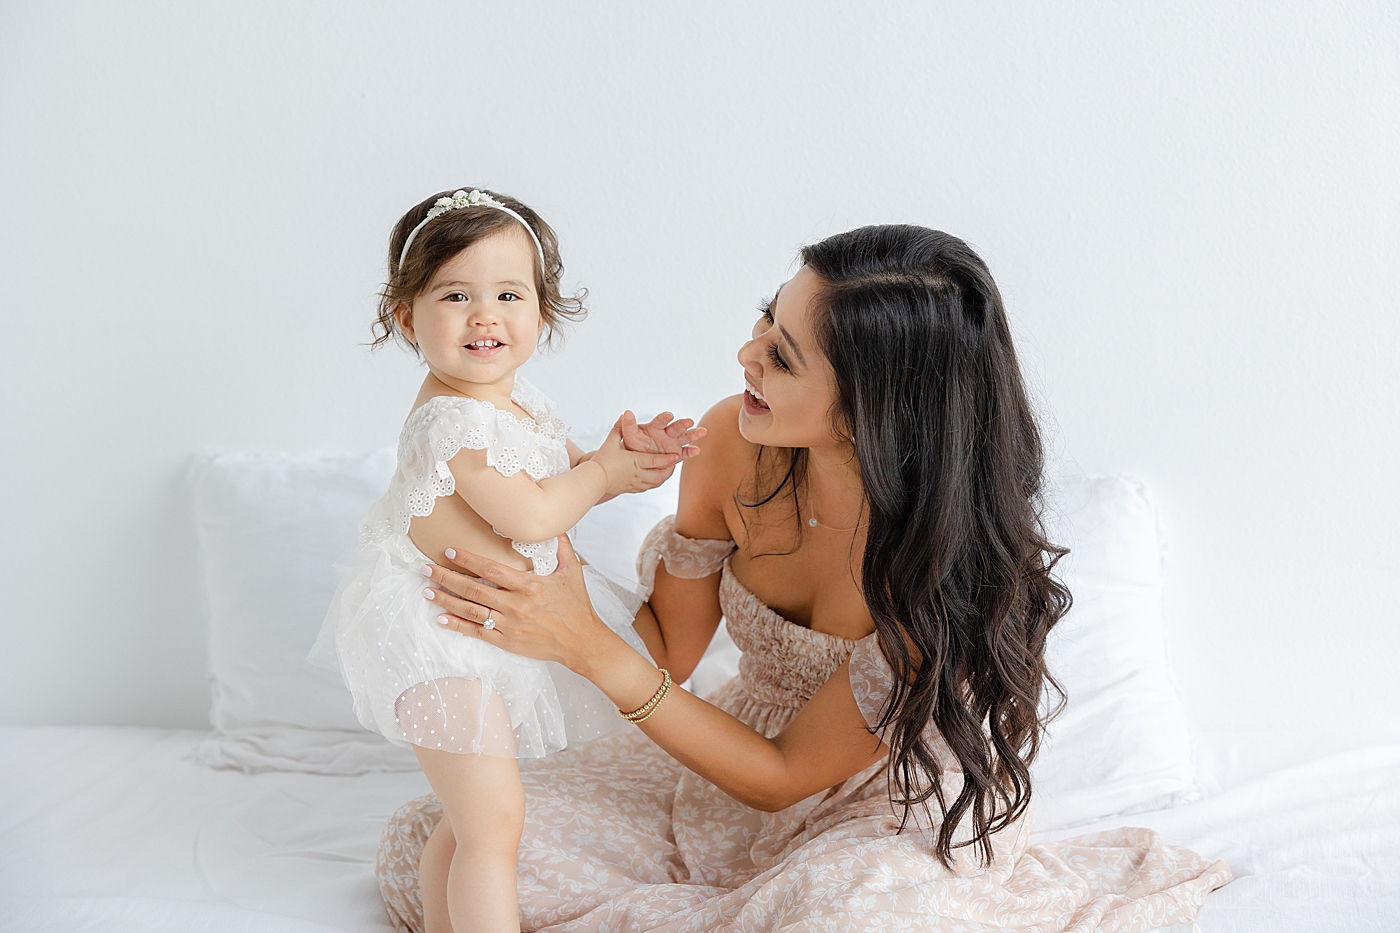 Mom and baby girl interacting sitting on a bed | Image by Sana Ahmed Photography